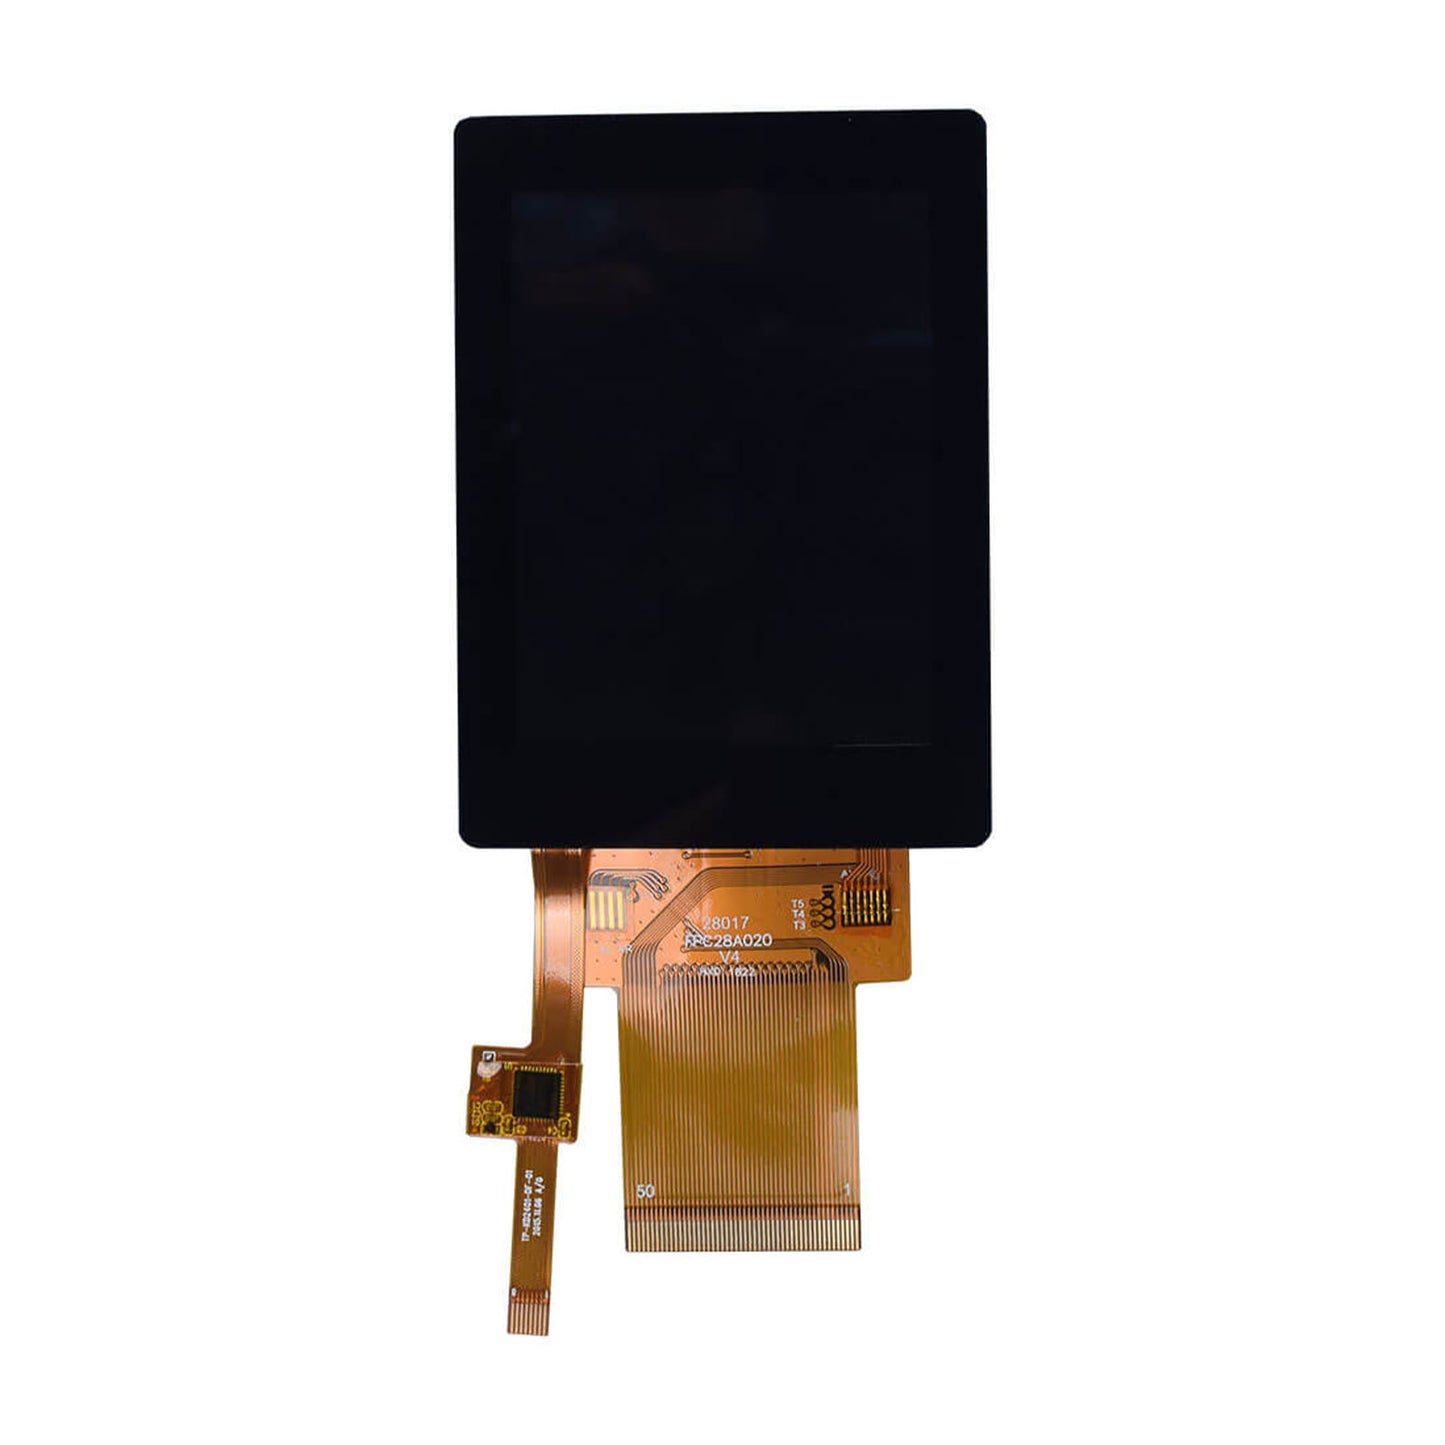 DisplayModule 2.8" IPS 240x320 TFT LCD Display Panel with Capacitive Touch - SPI, MCU, RGB